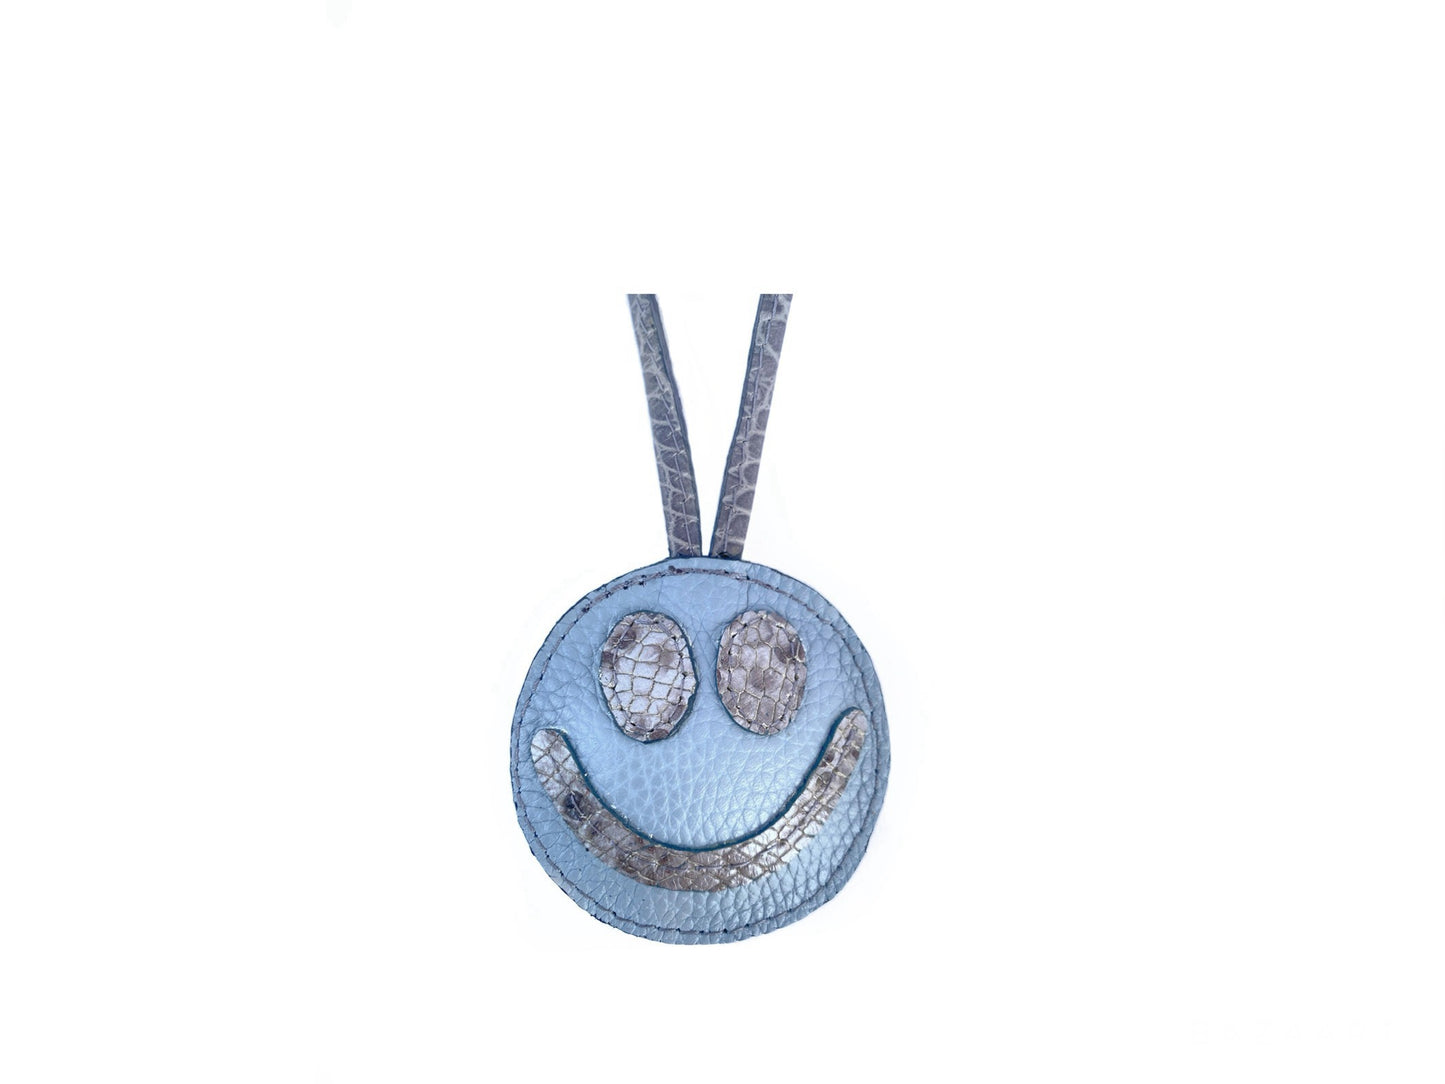 BLUE SMILEY FACE CHARM